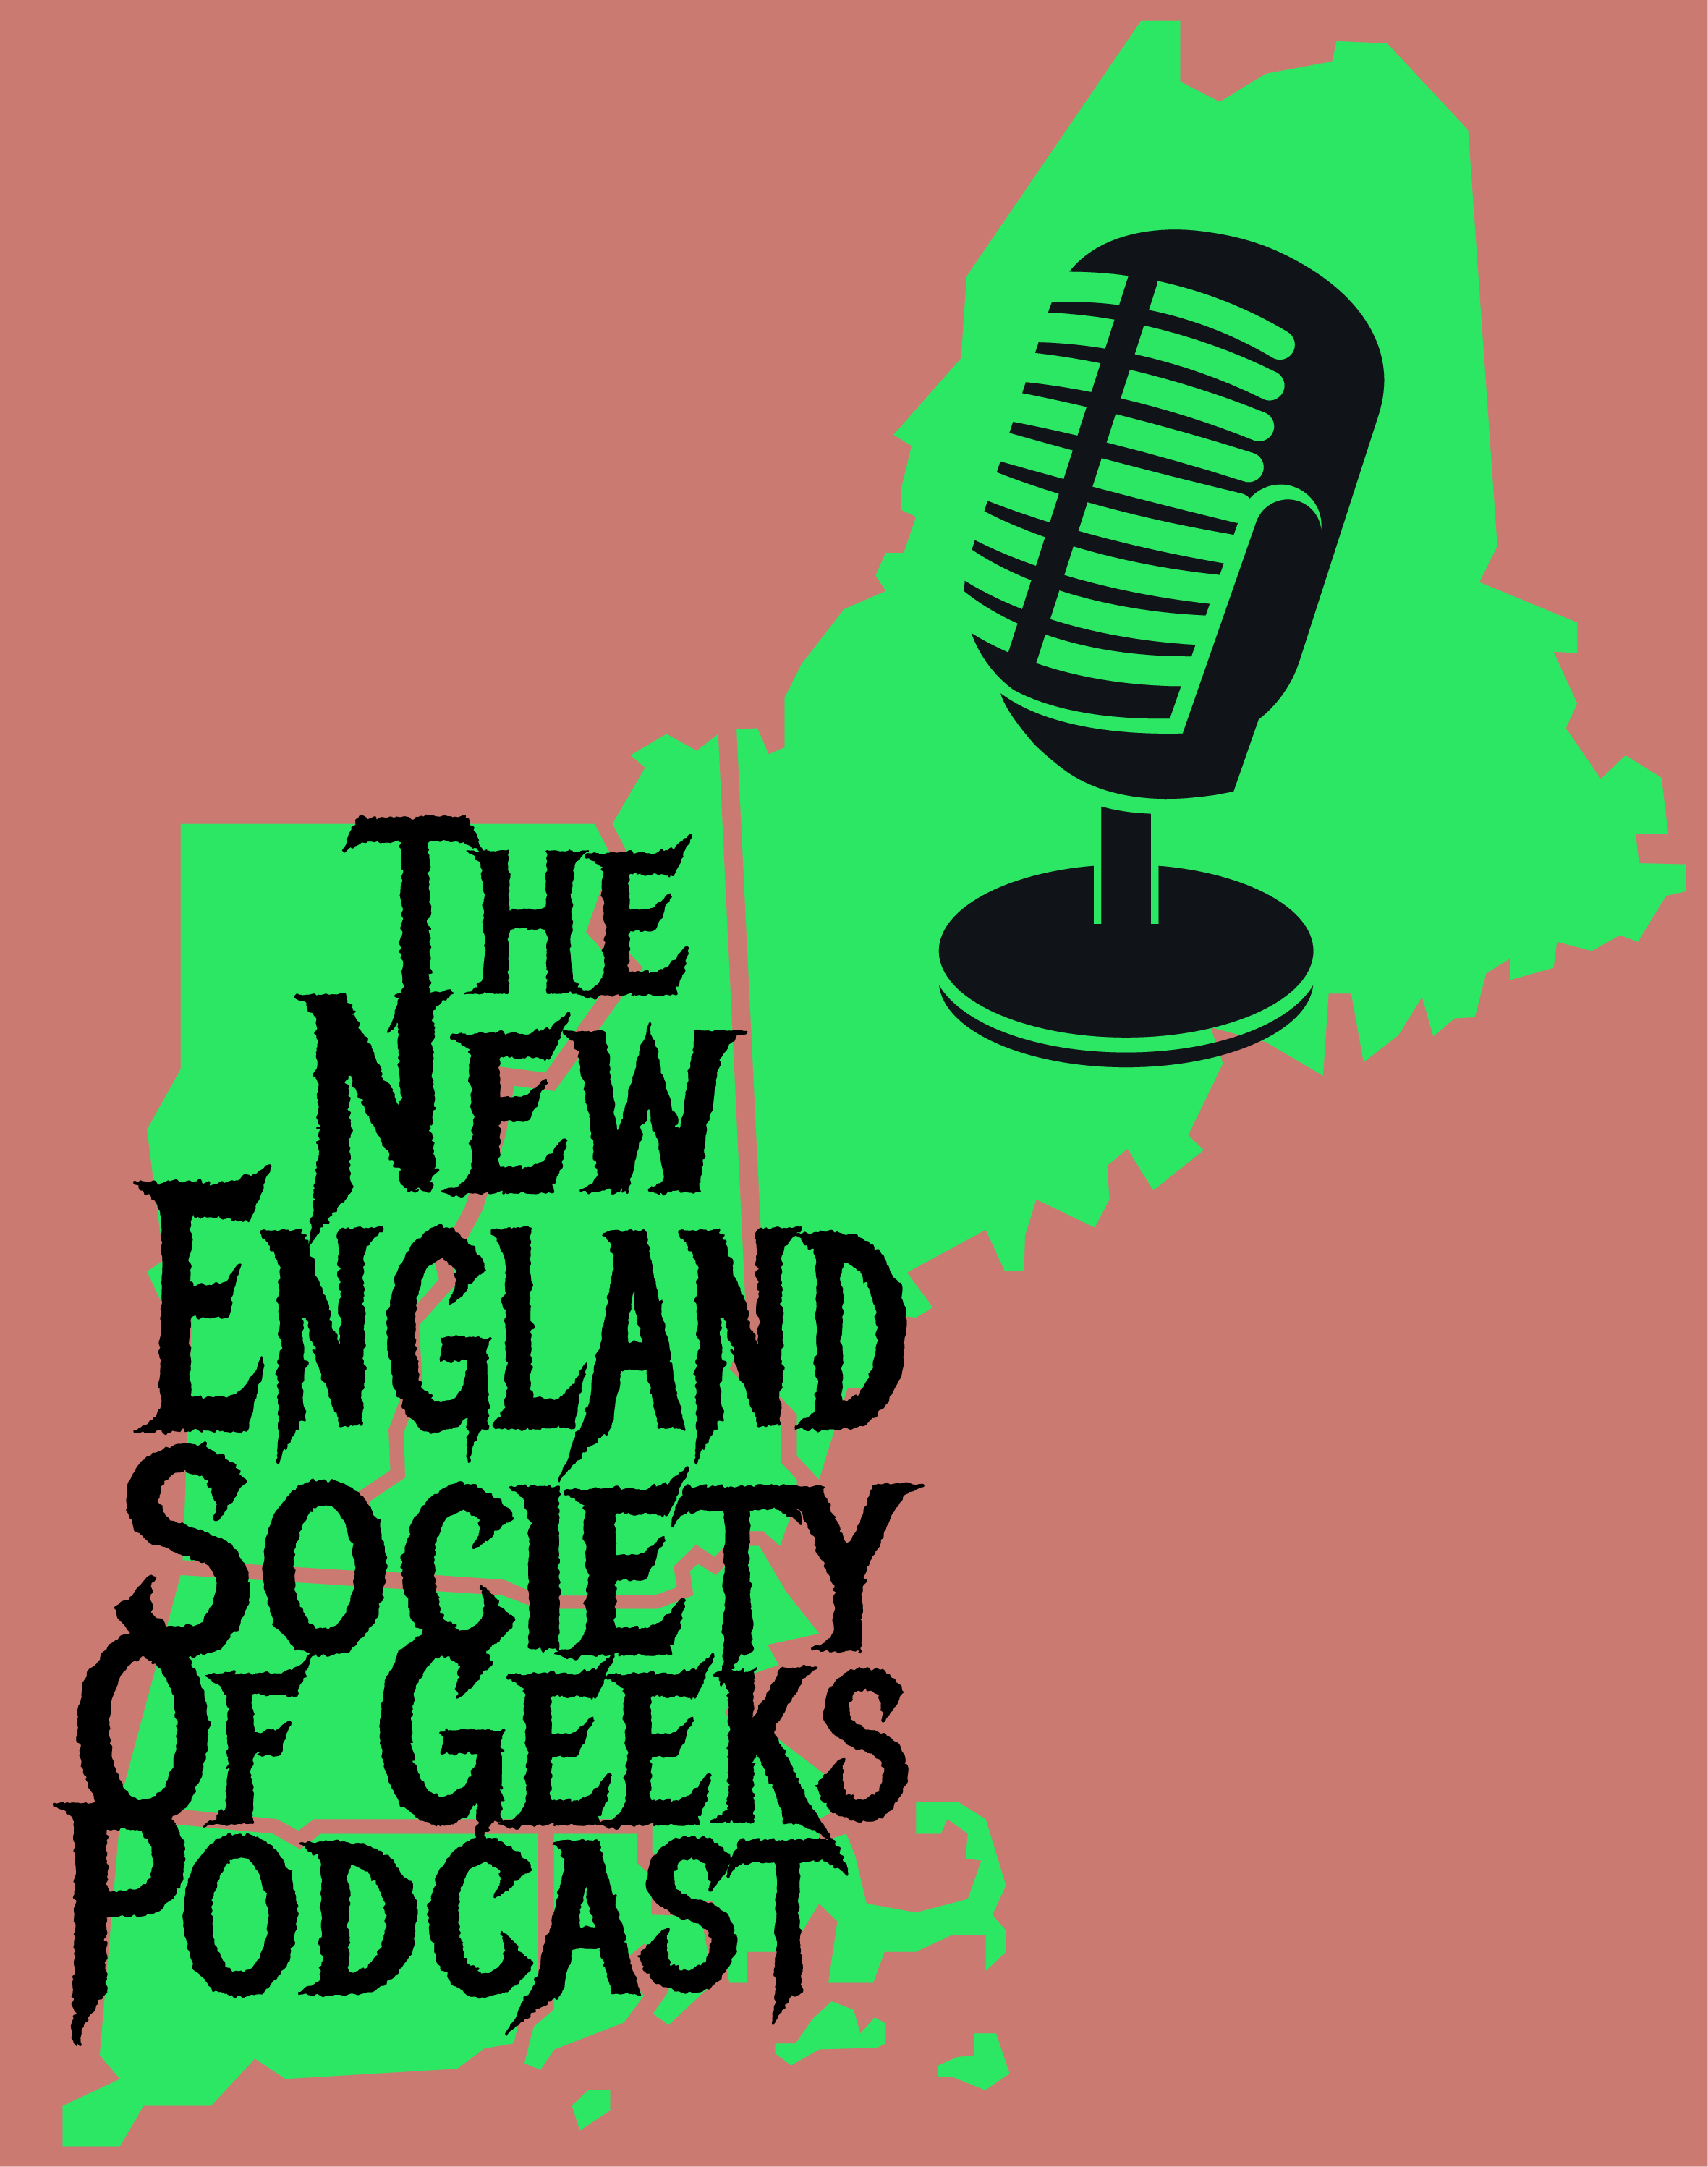 The New England Society of Geeks Podcast